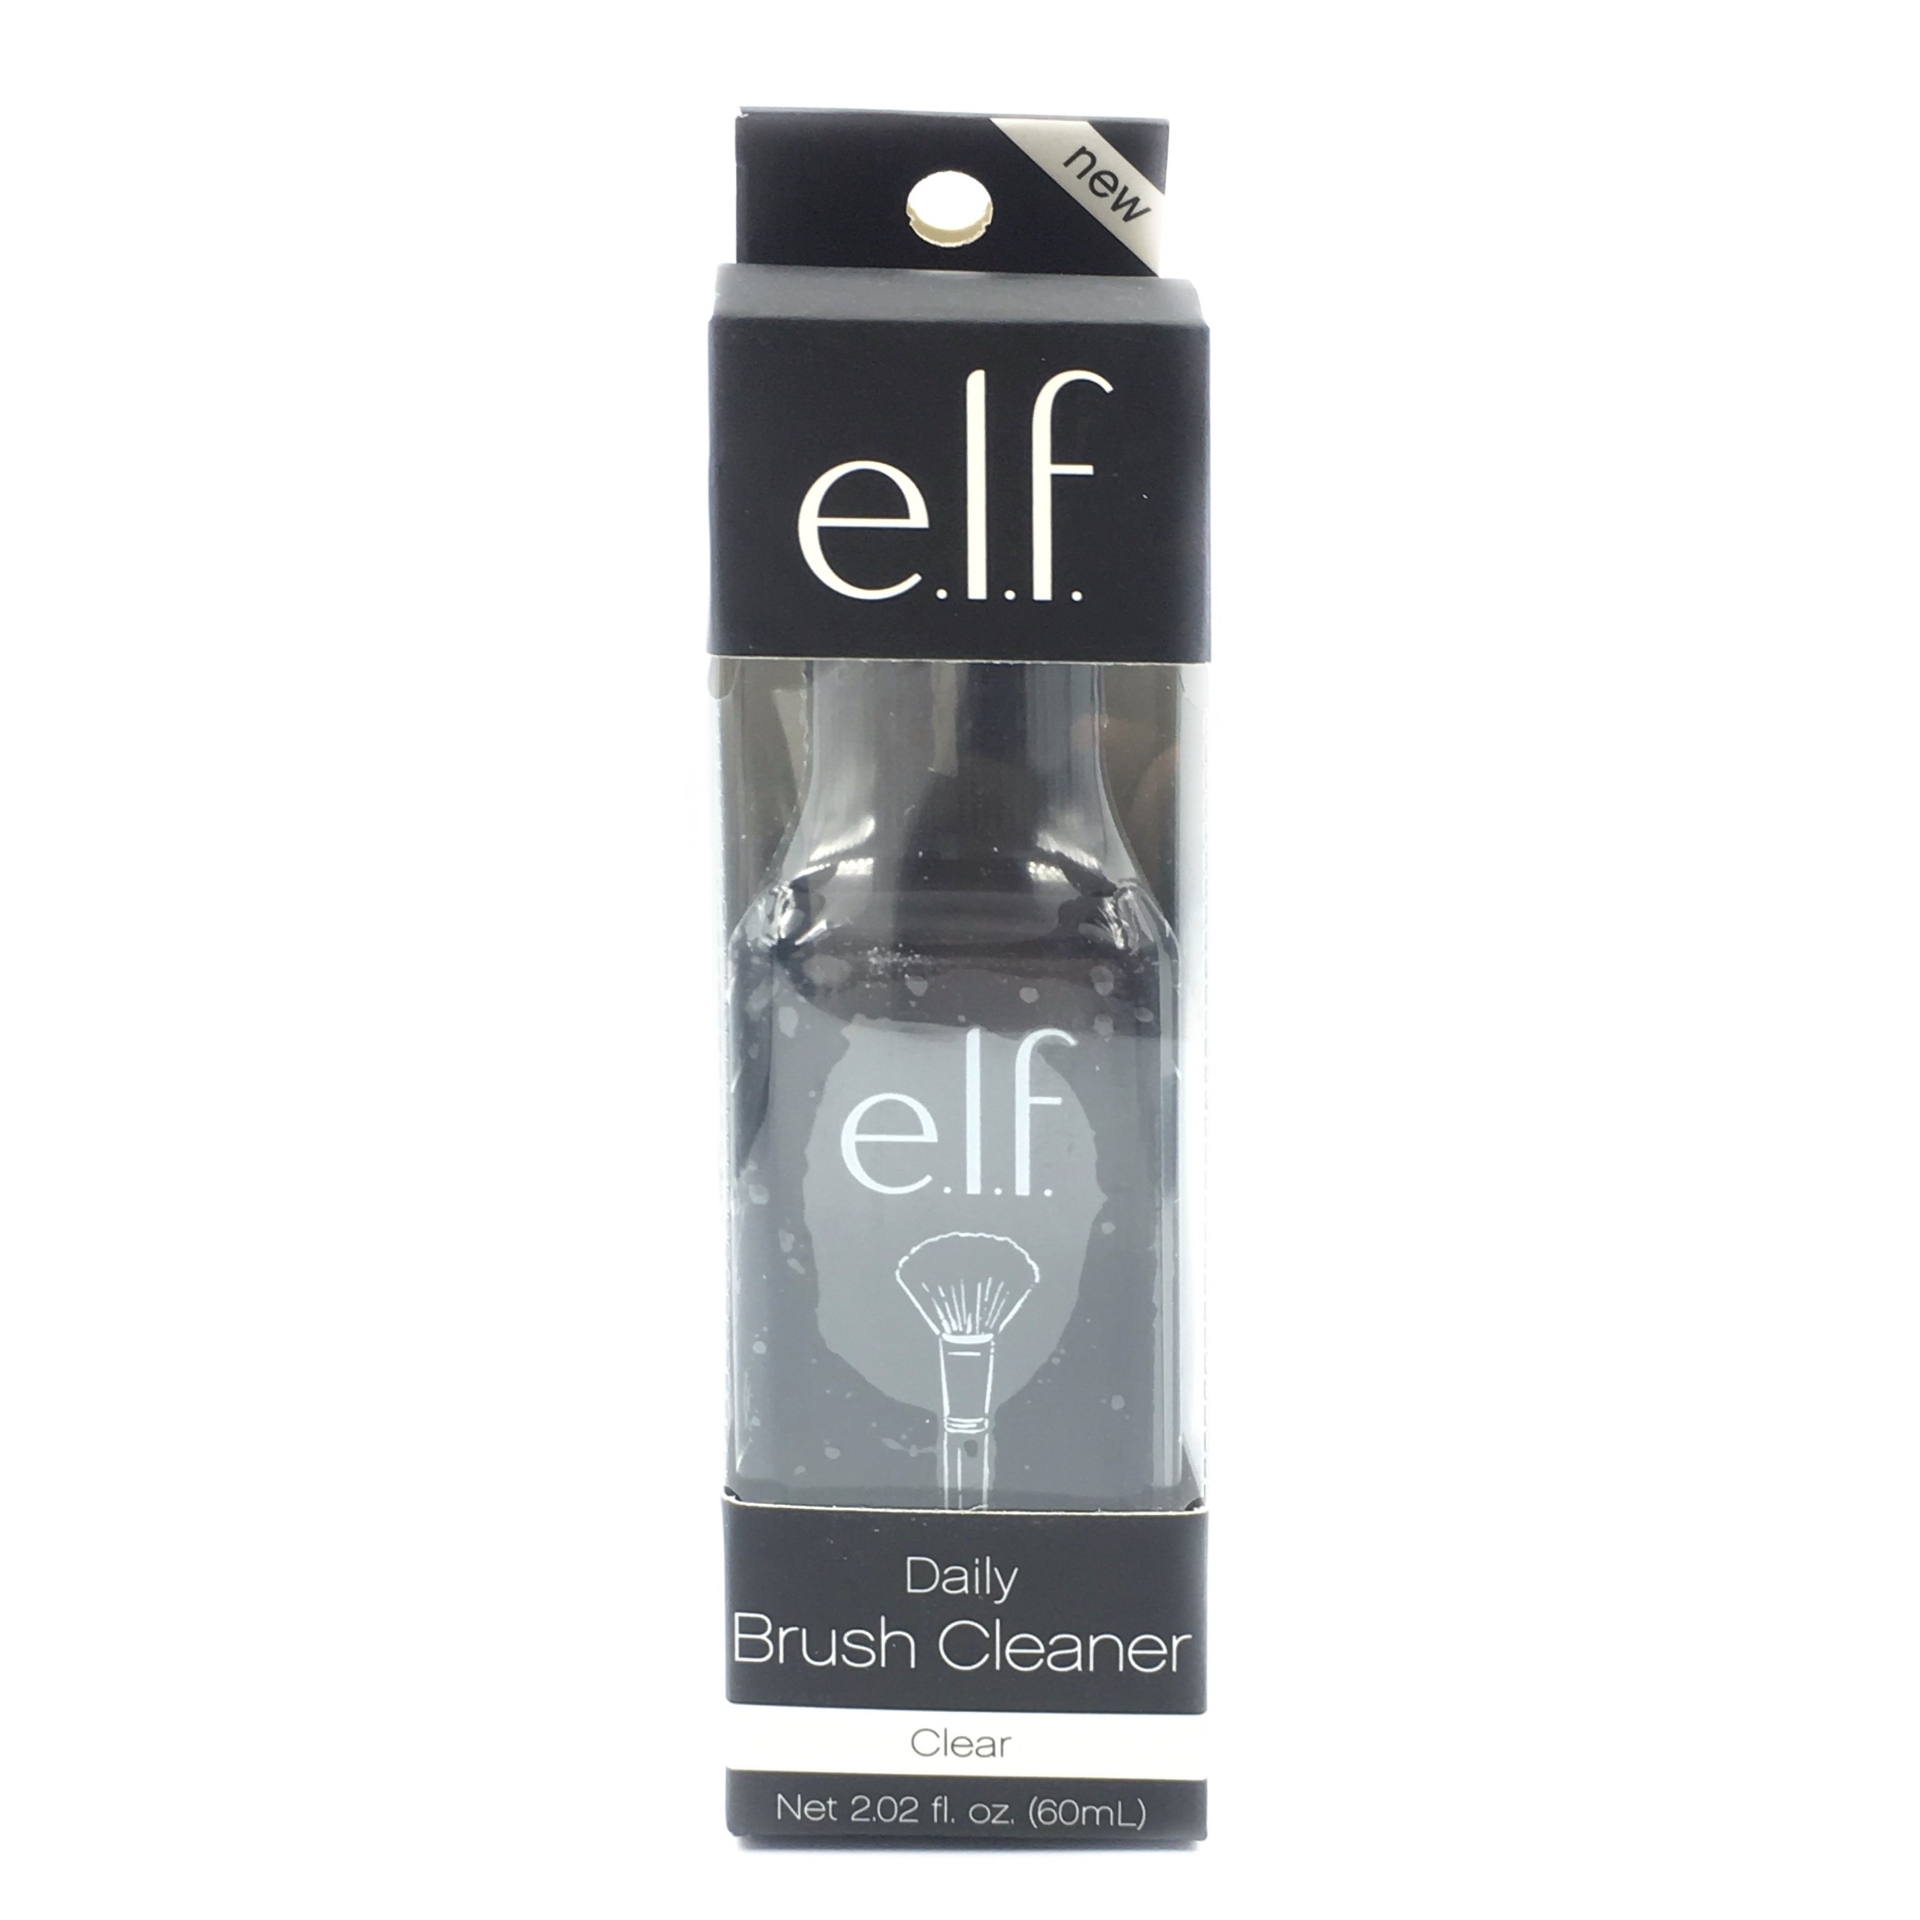 E.L.F Daily Brush Cleaner Clear Tools